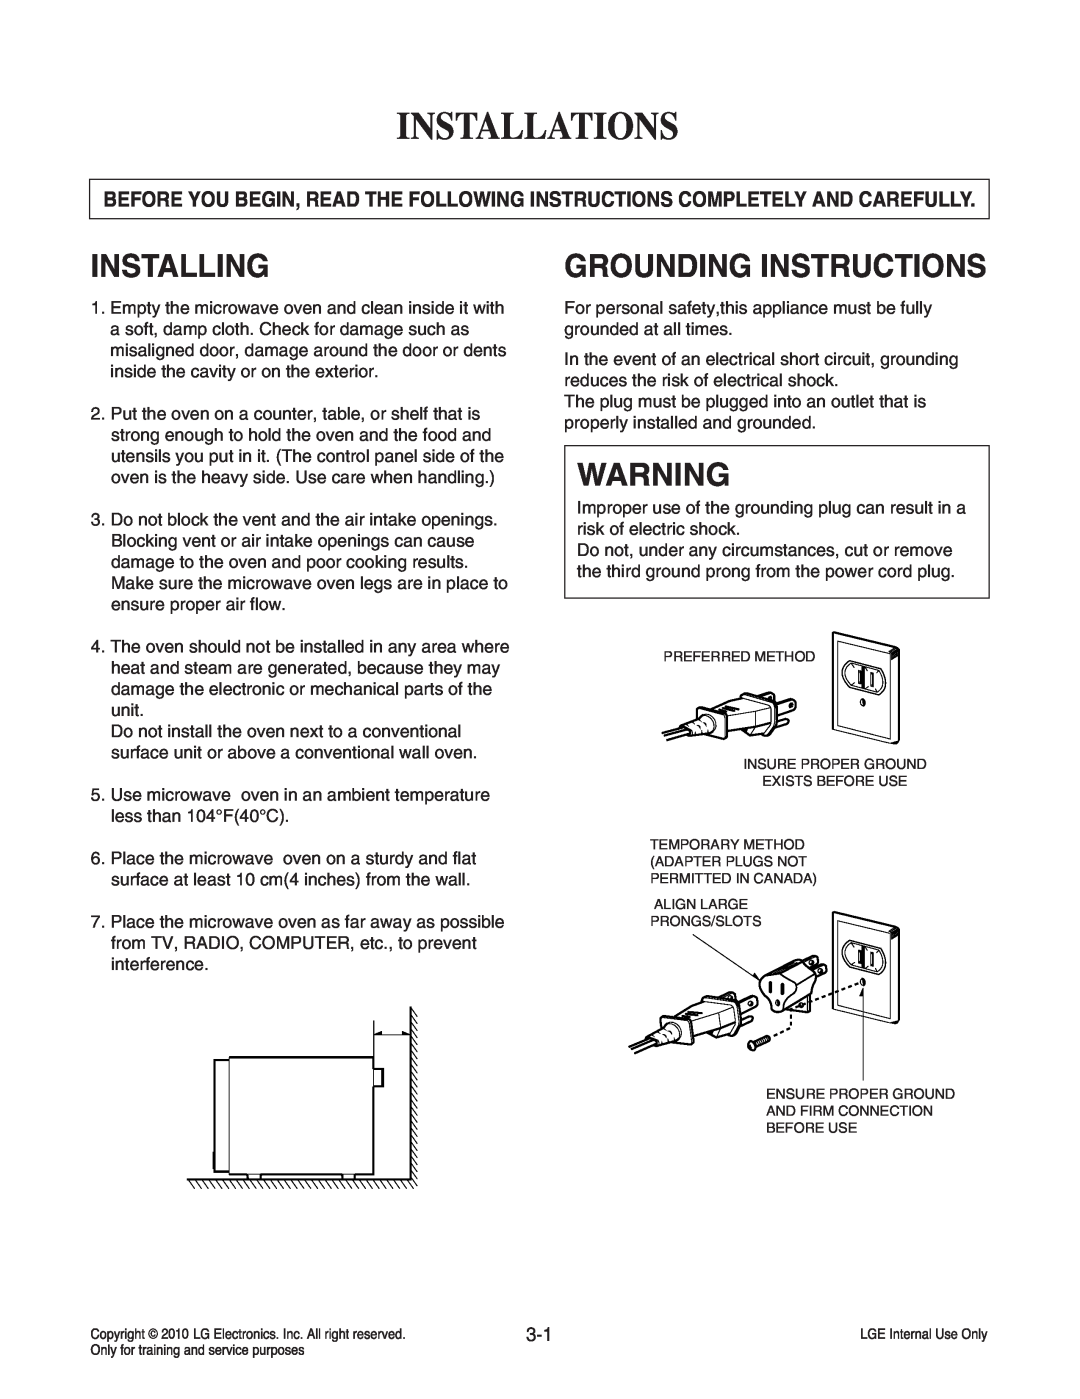 Frigidaire LCRT2010ST service manual Installations, Installing, Grounding Instructions 